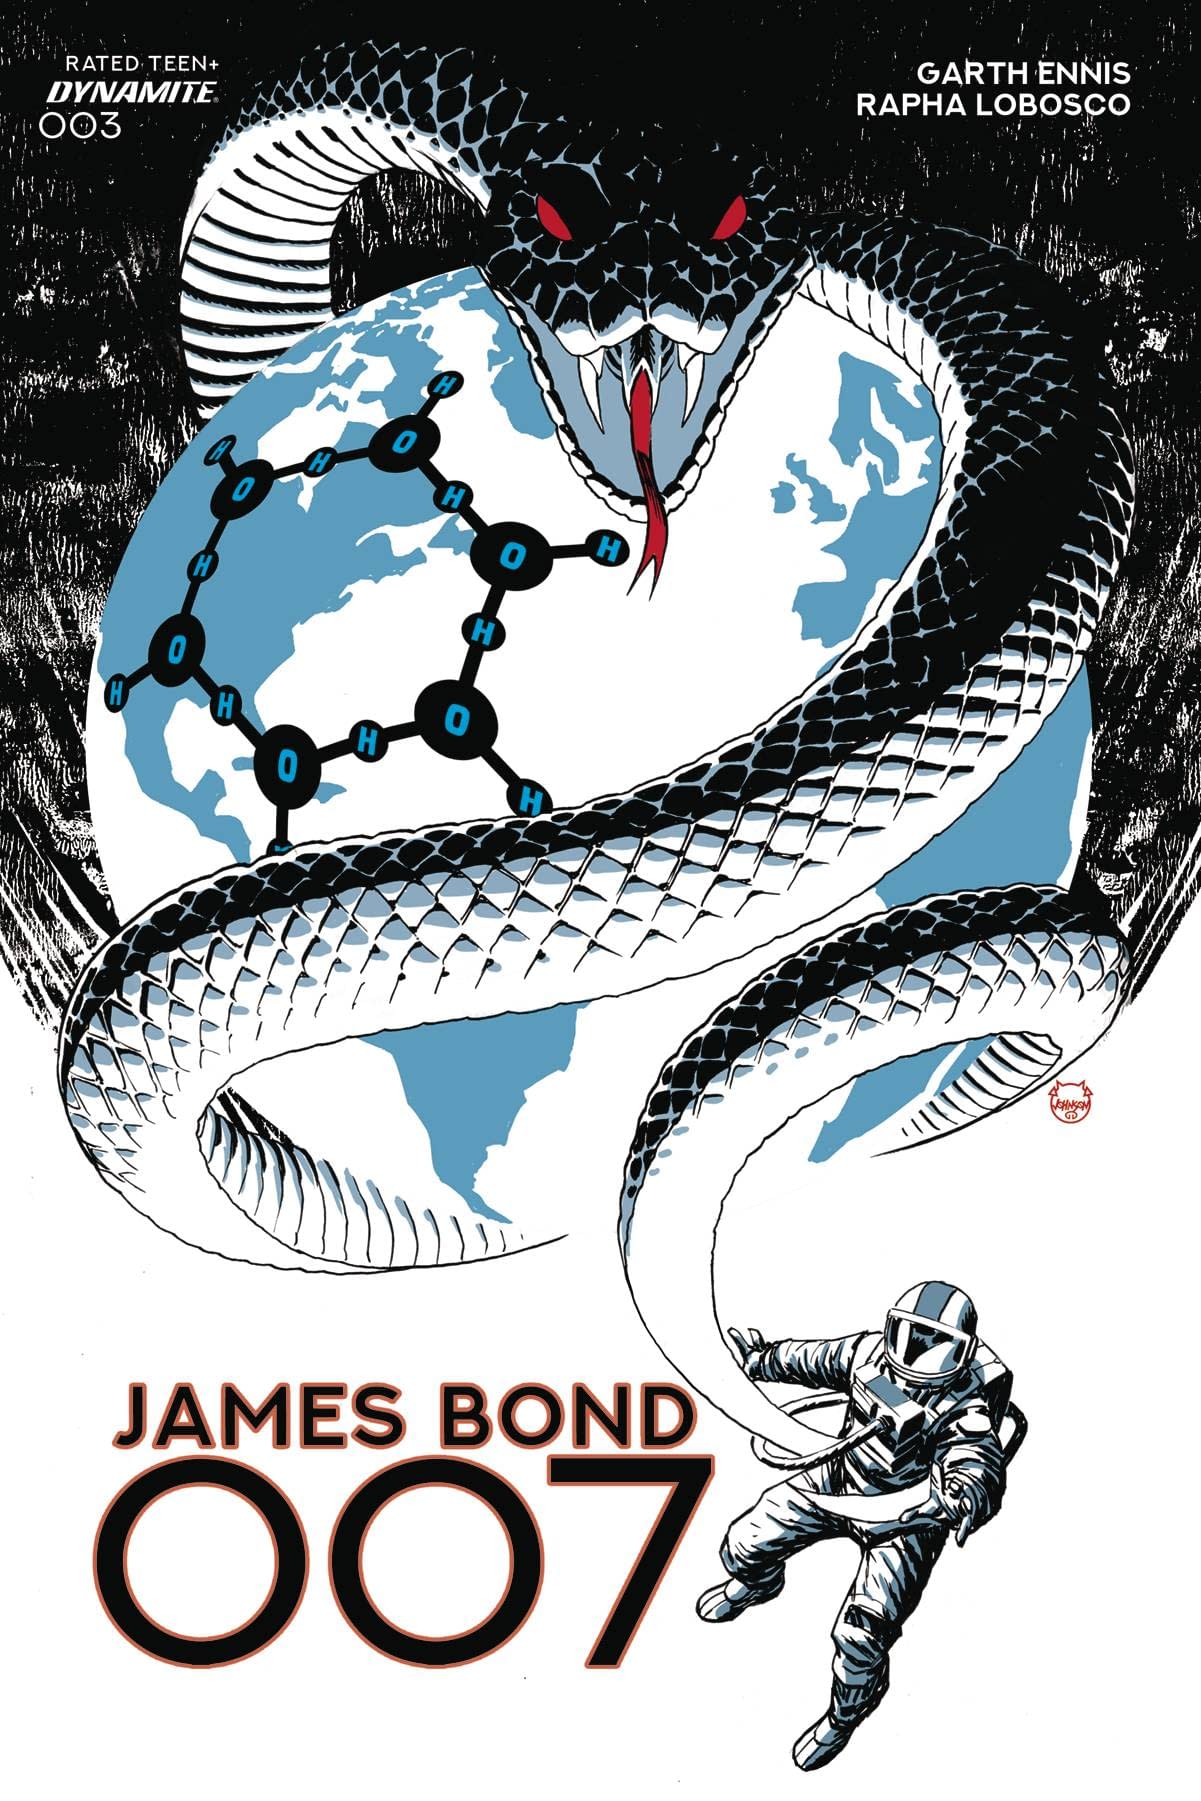 Cover image for James Bond 007 #3